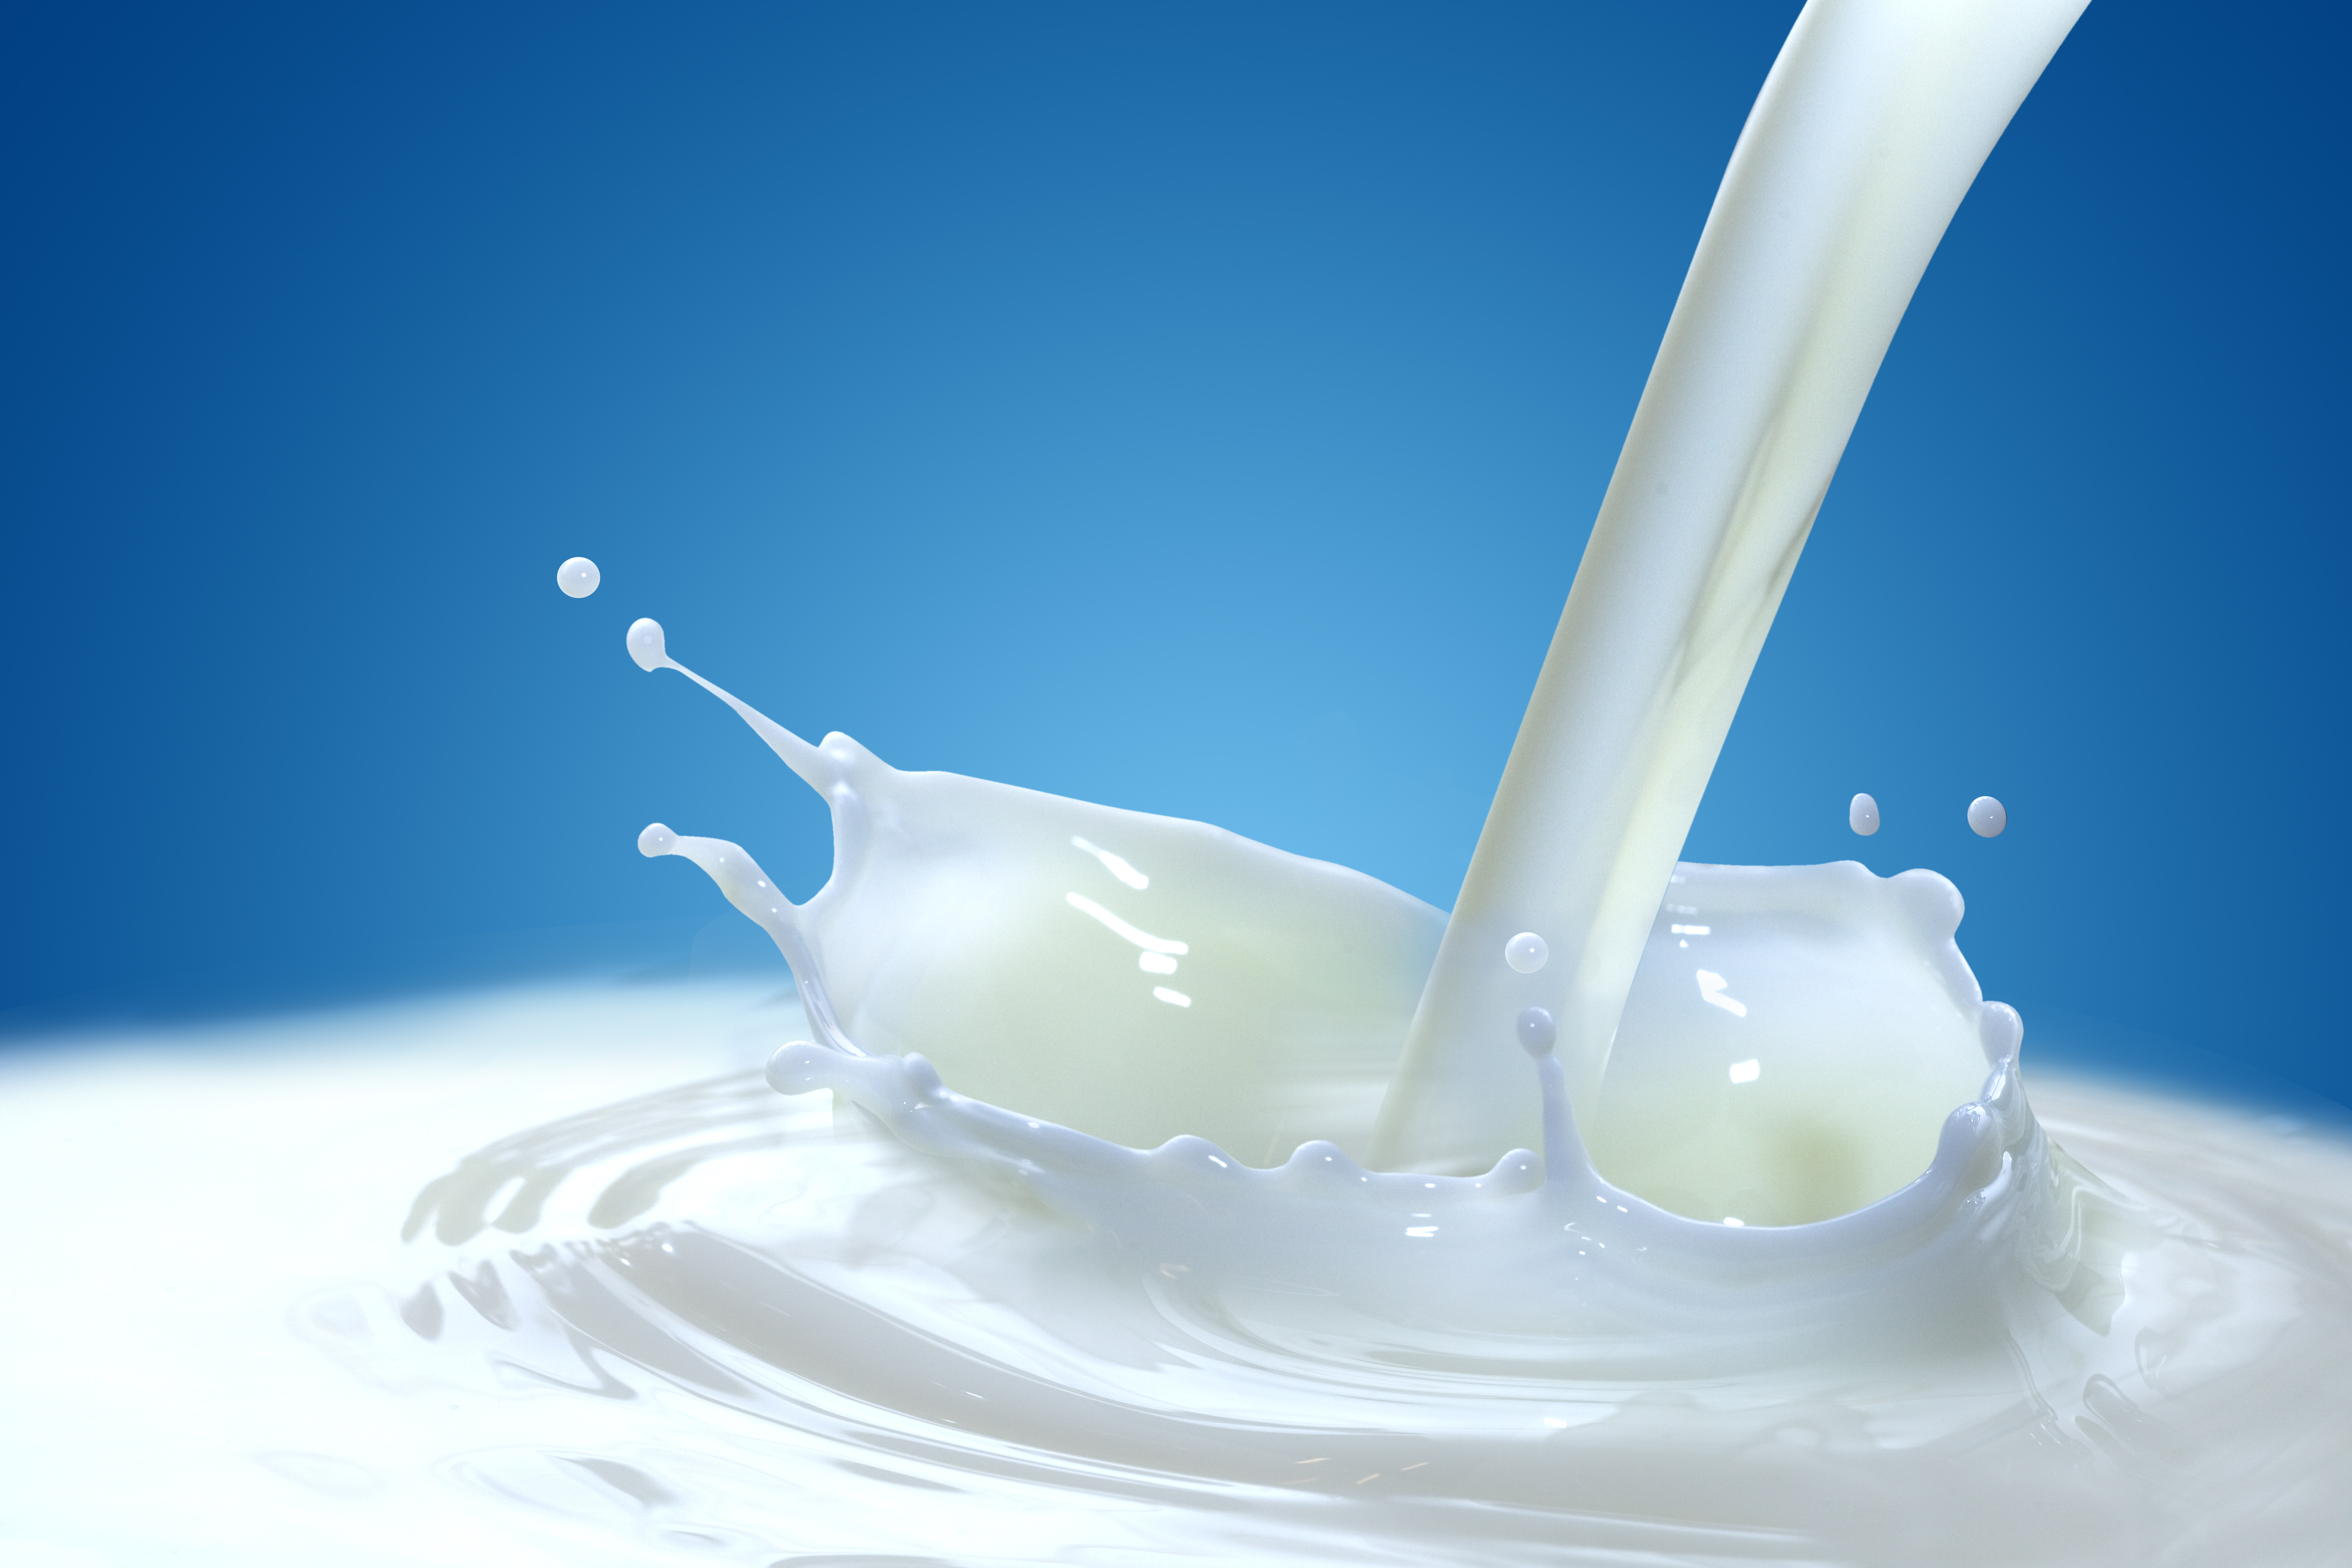 Global Dairy Market Recovery Starts From 2017 According to Report